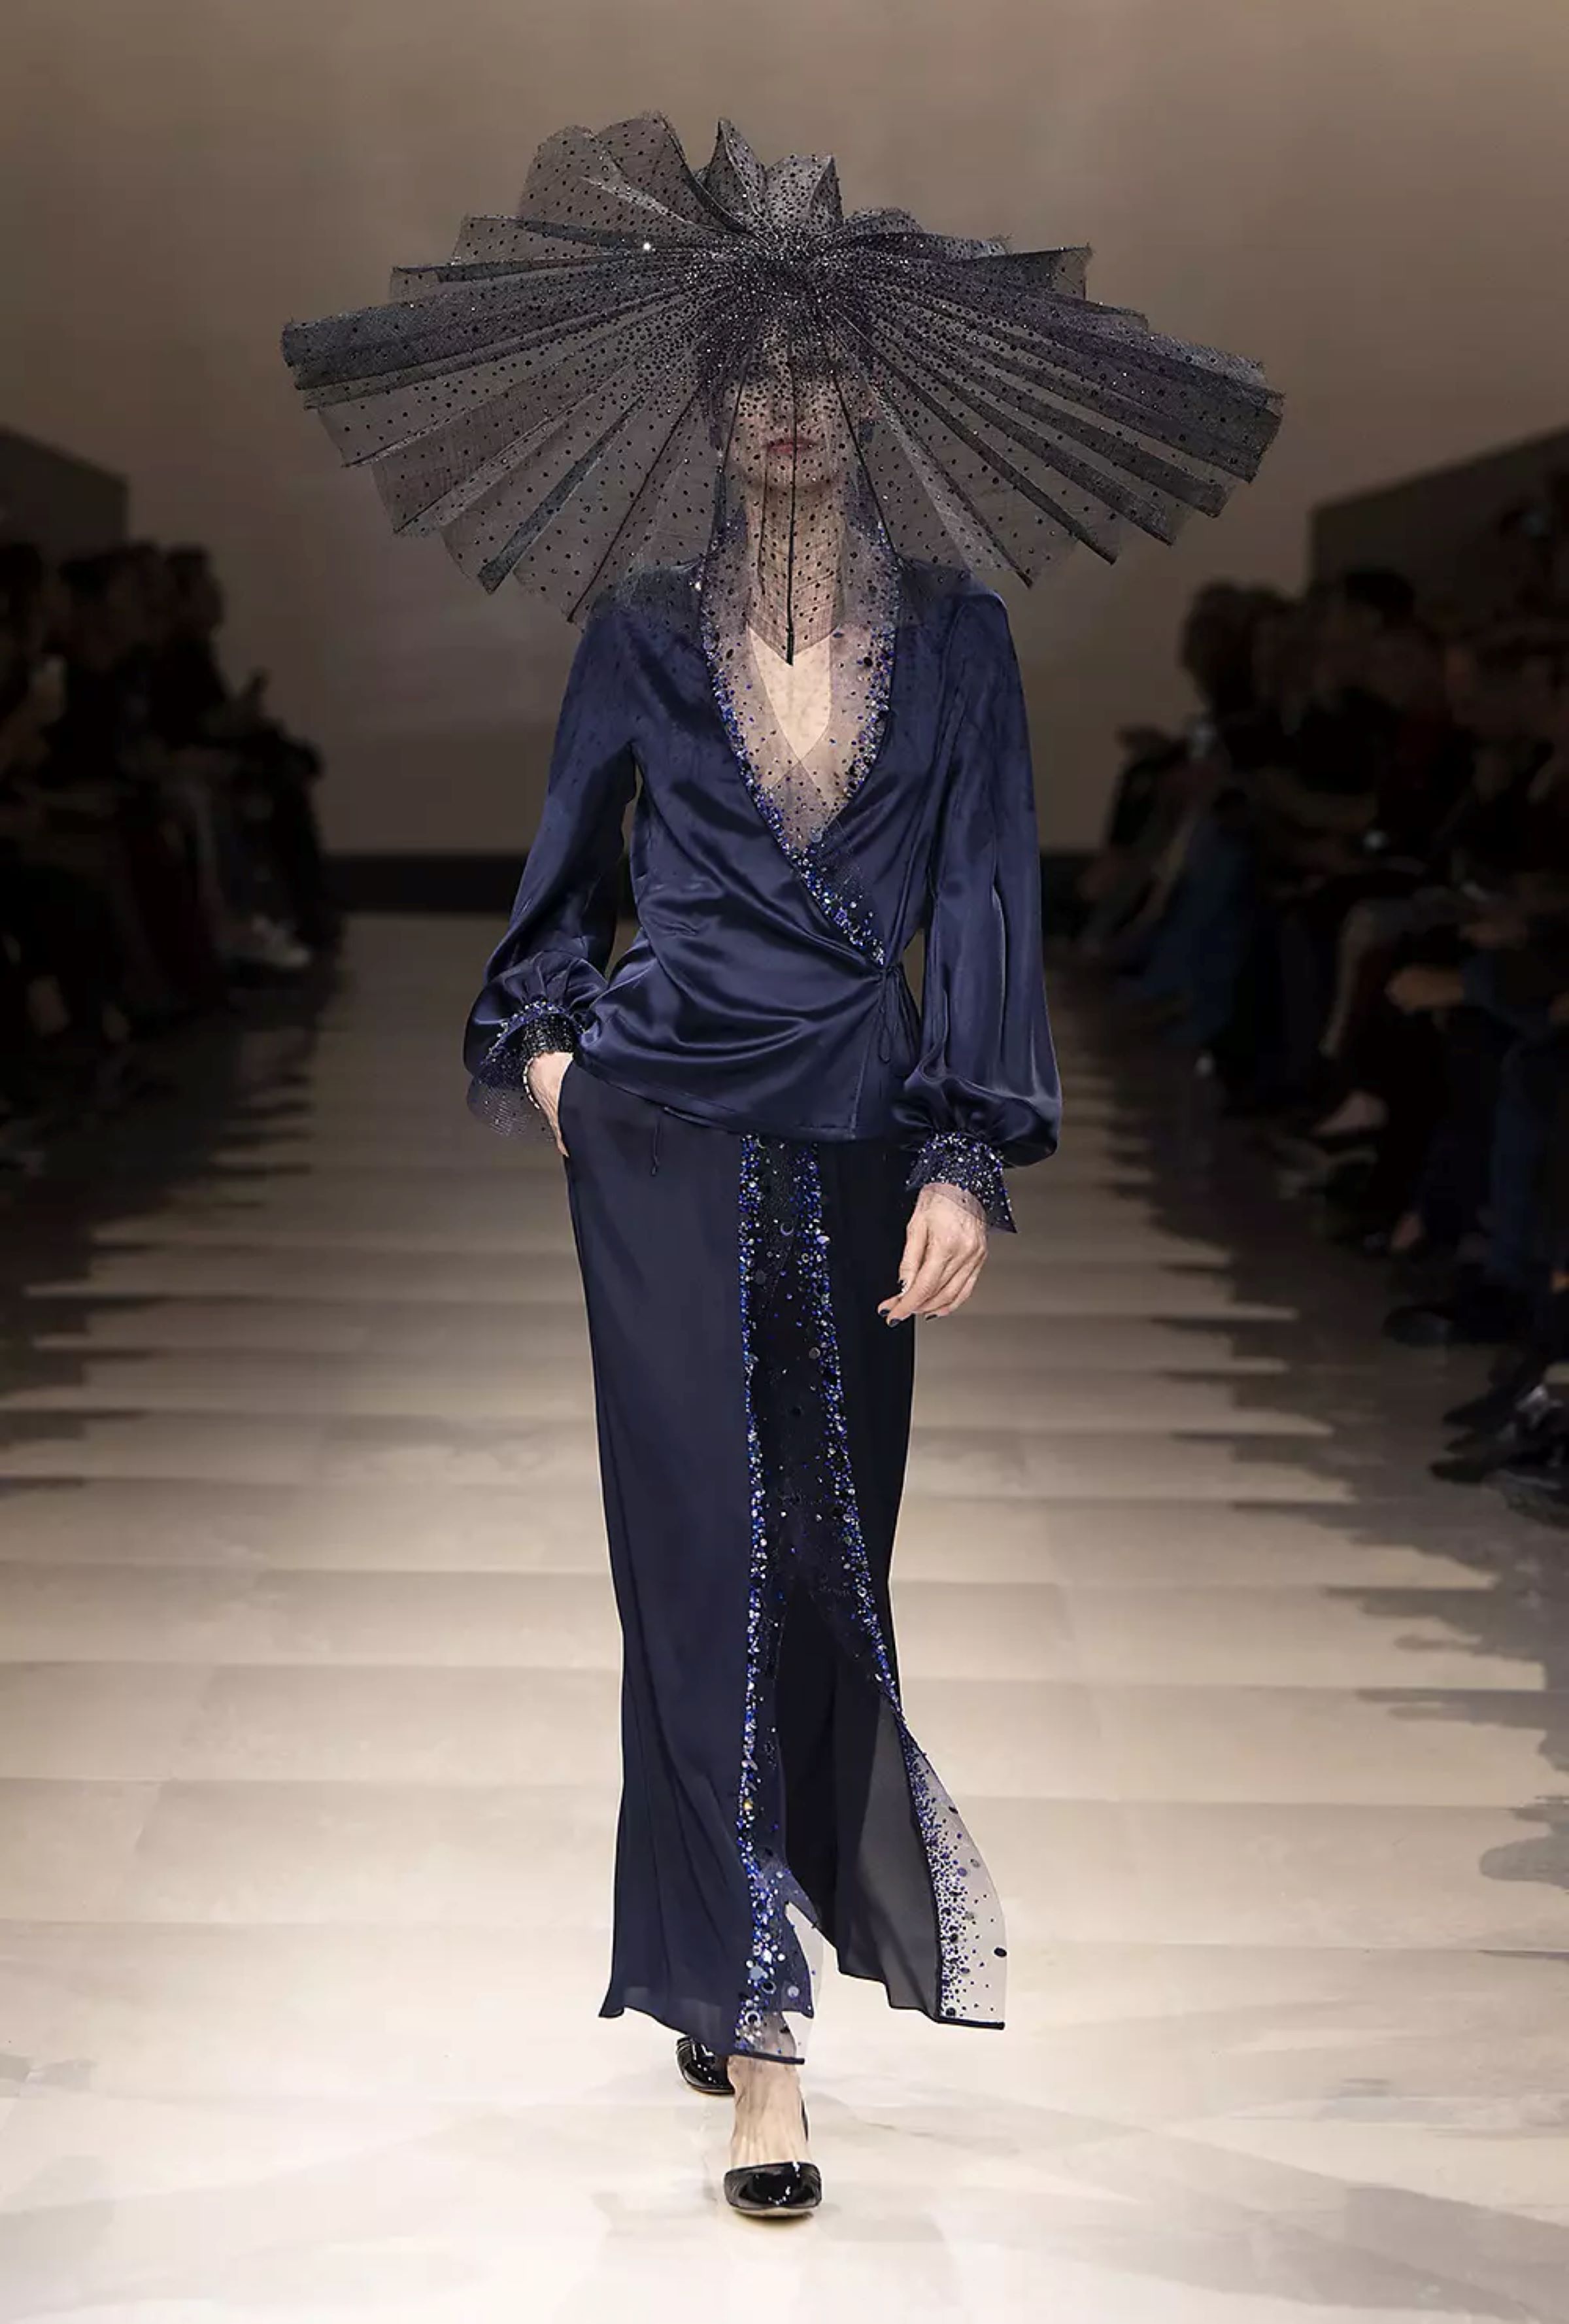 The Future of Armani House in Question at Paris Fashion Week - Luxury ...